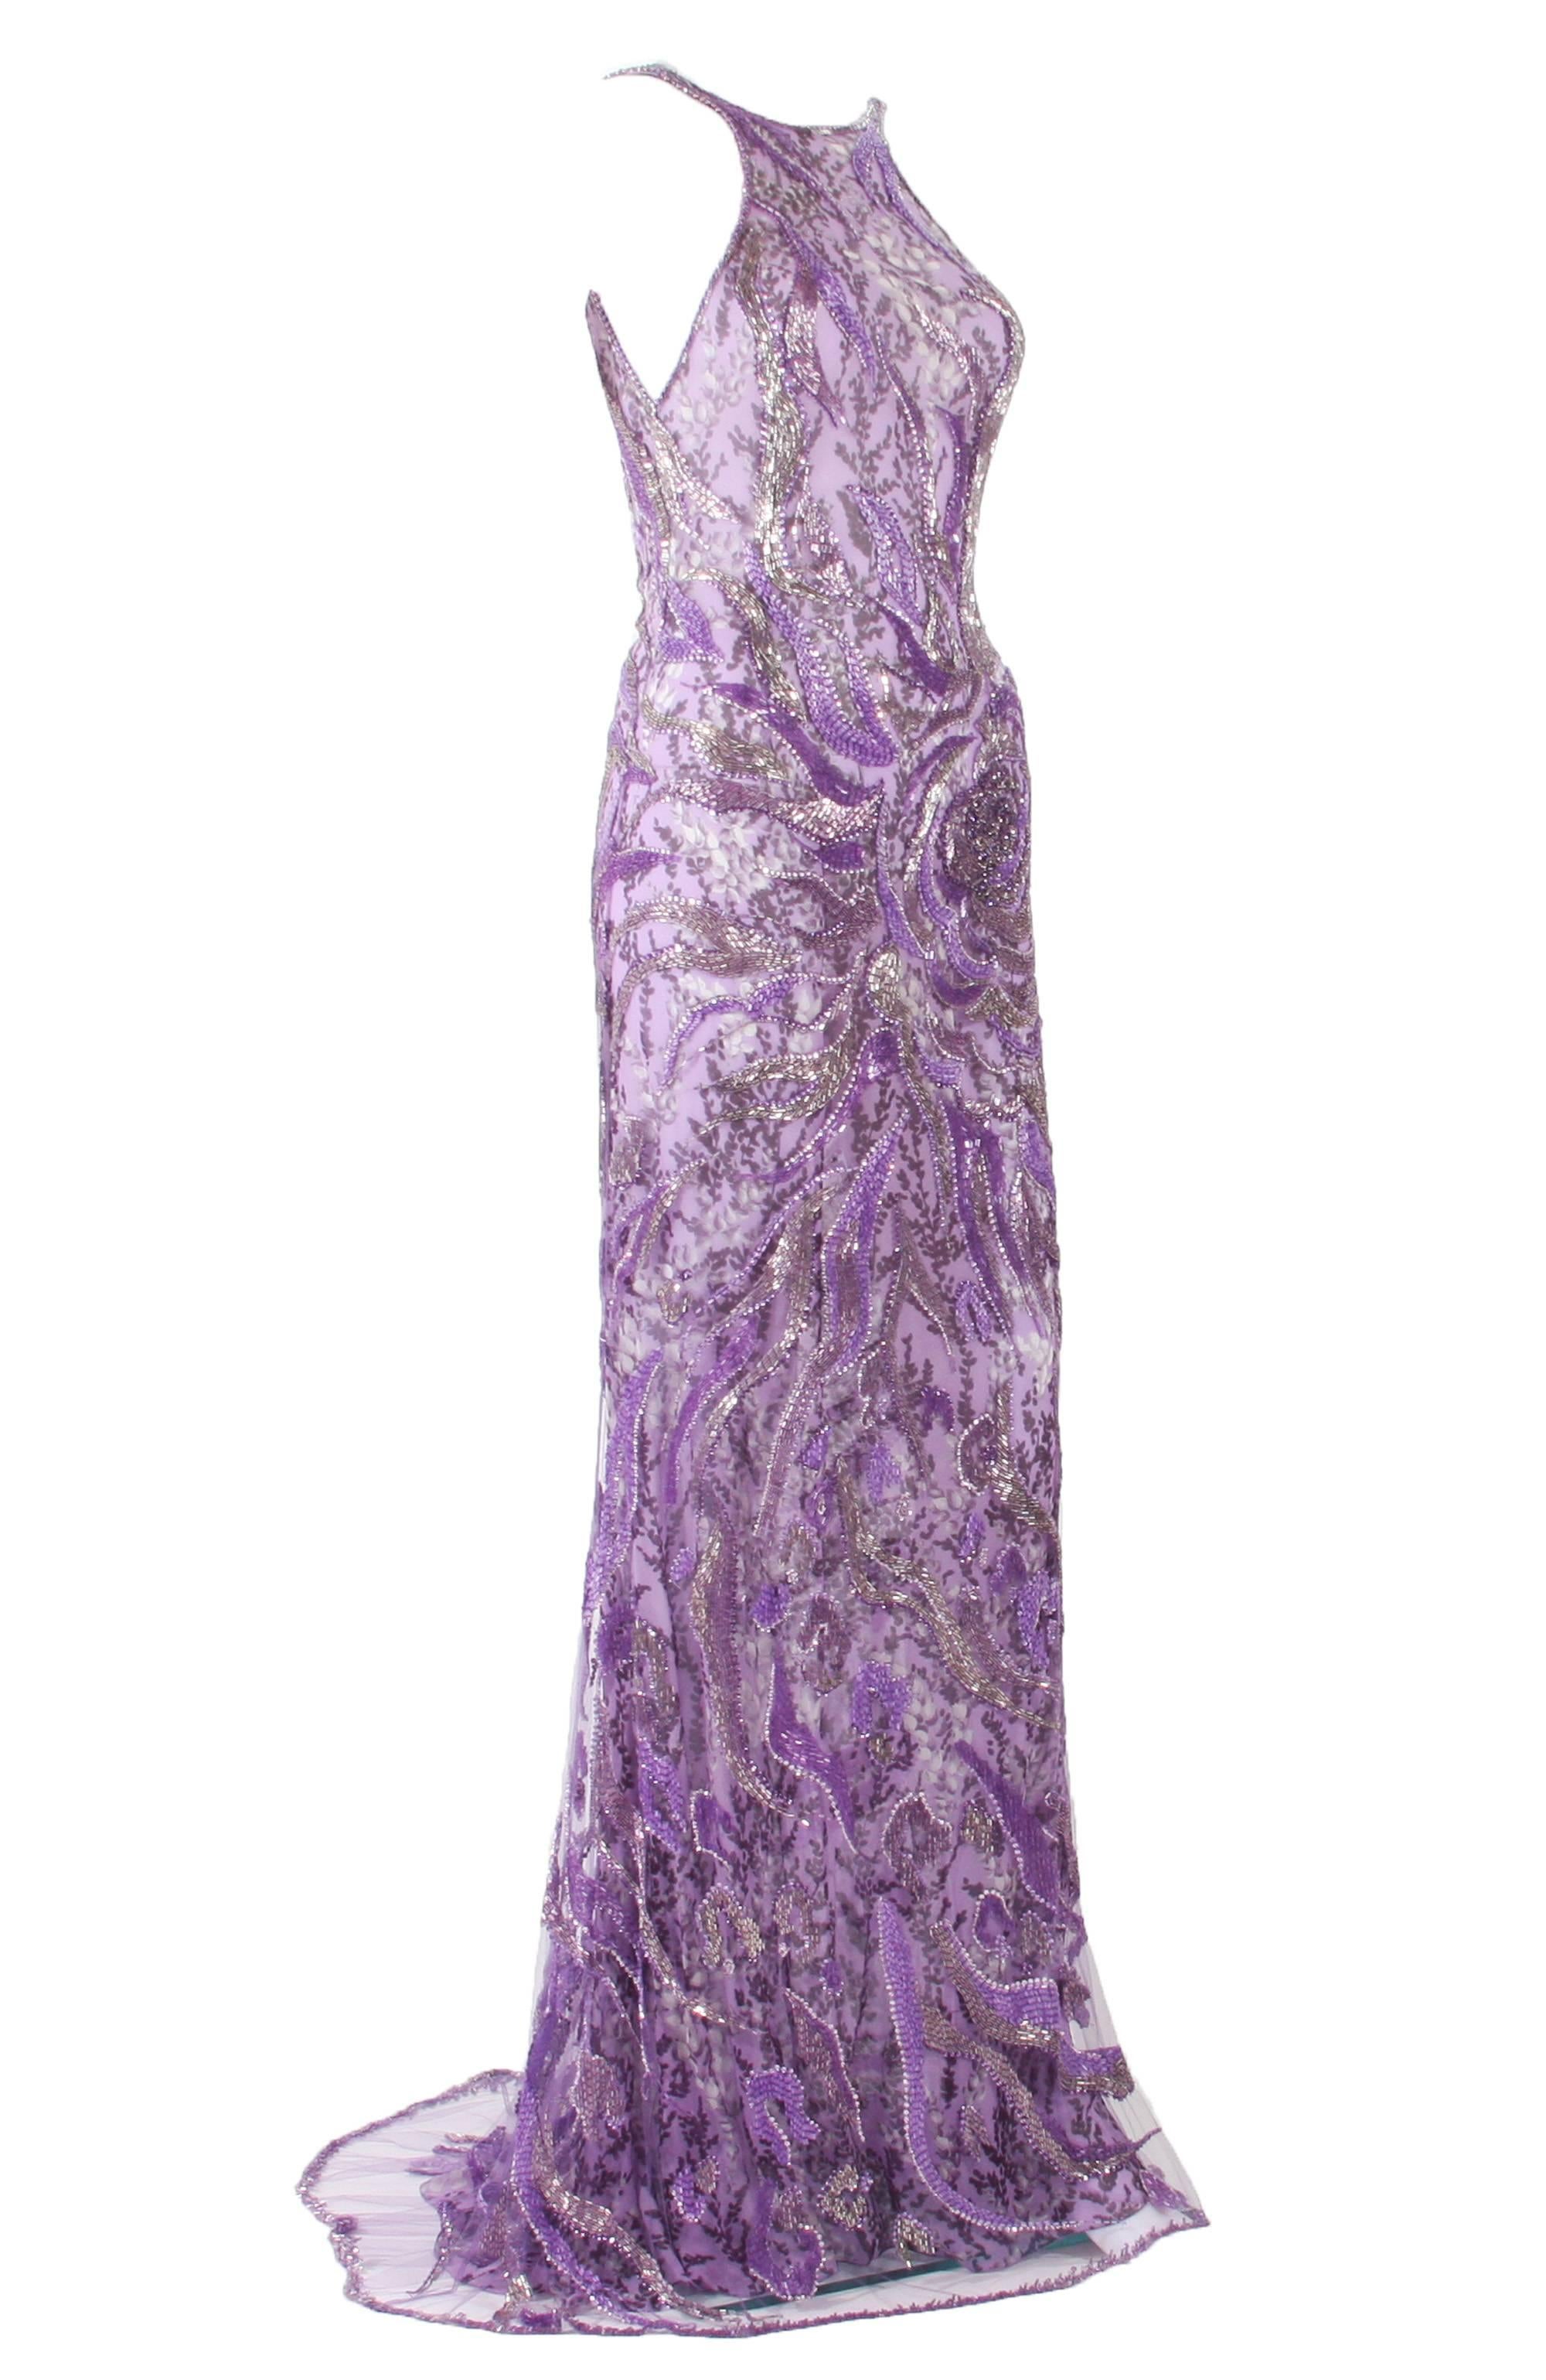 Atelier Versace Wisteria Purple Fully Beaded Silk Dress Gown
Designer size 42 ( run smaller - measurements provided )
100% Silk Wisteria Purple Dress with Tulle Fully Embellished Overlay.
Measurements: Bust - 32 inches, Waist - 26